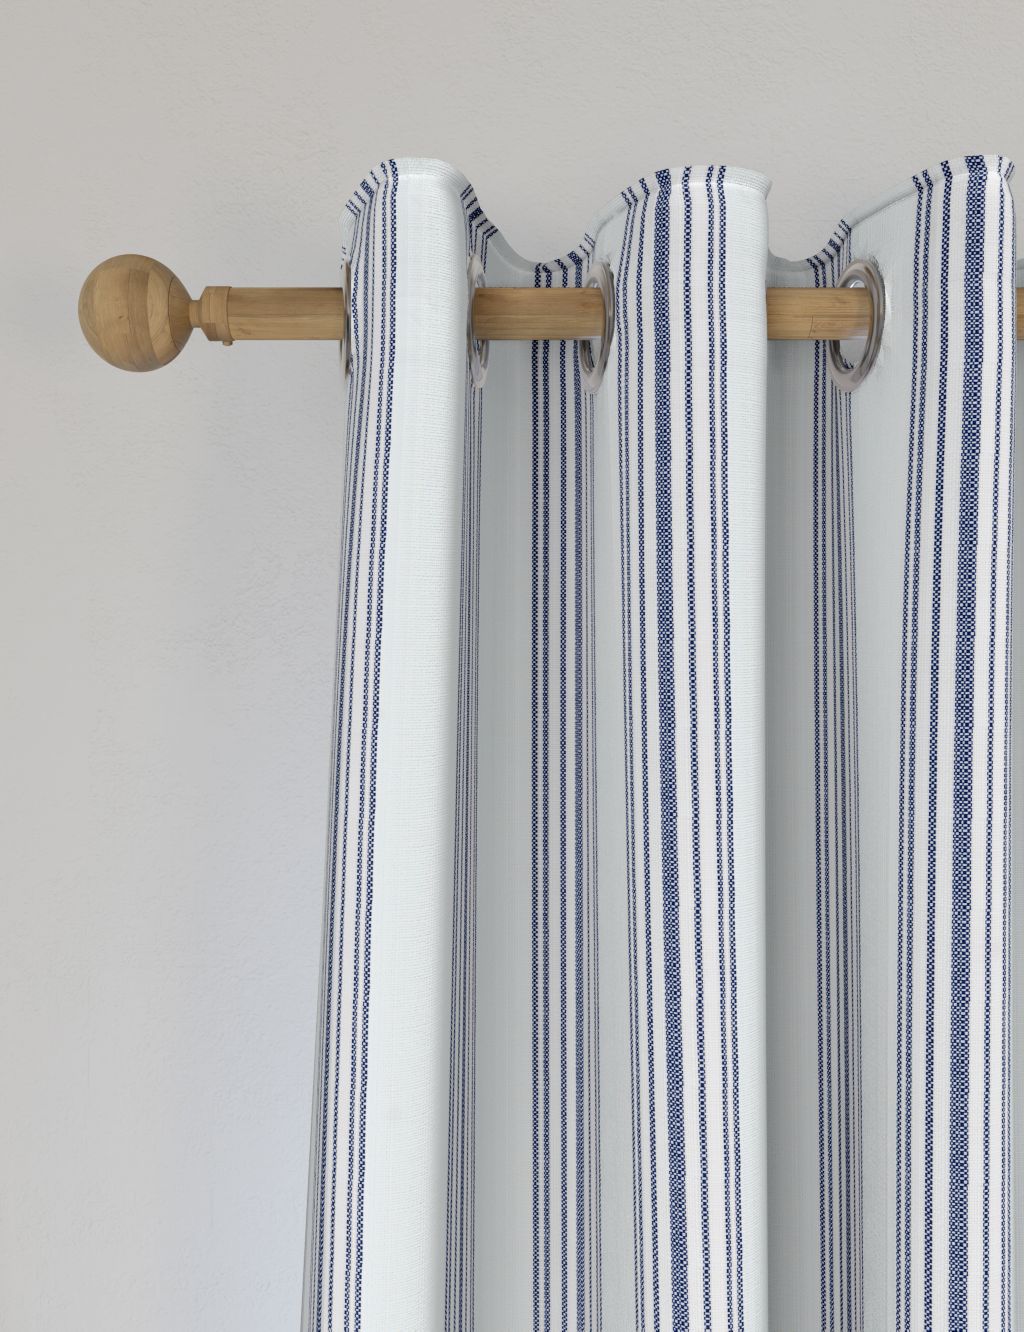 Woven Striped Eyelet Curtains image 3